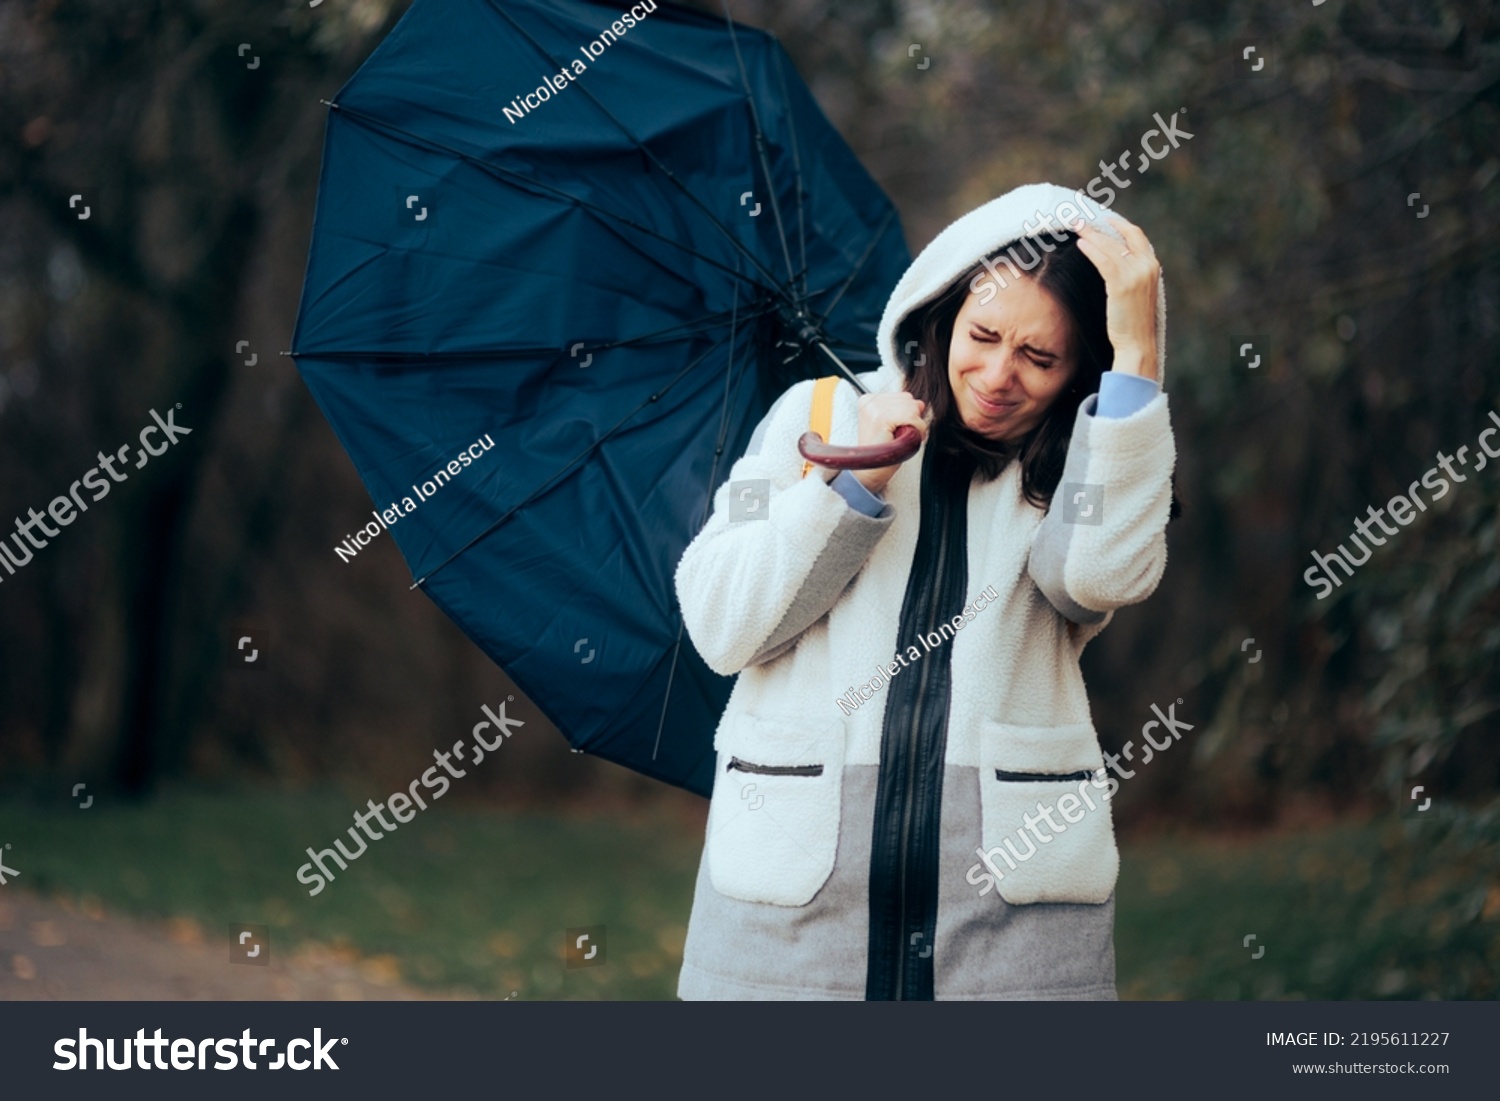 
Woman Struggling During Raining Storm Holding an Umbrella. Unhappy girl fighting windstorms outdoors in nature
 #2195611227